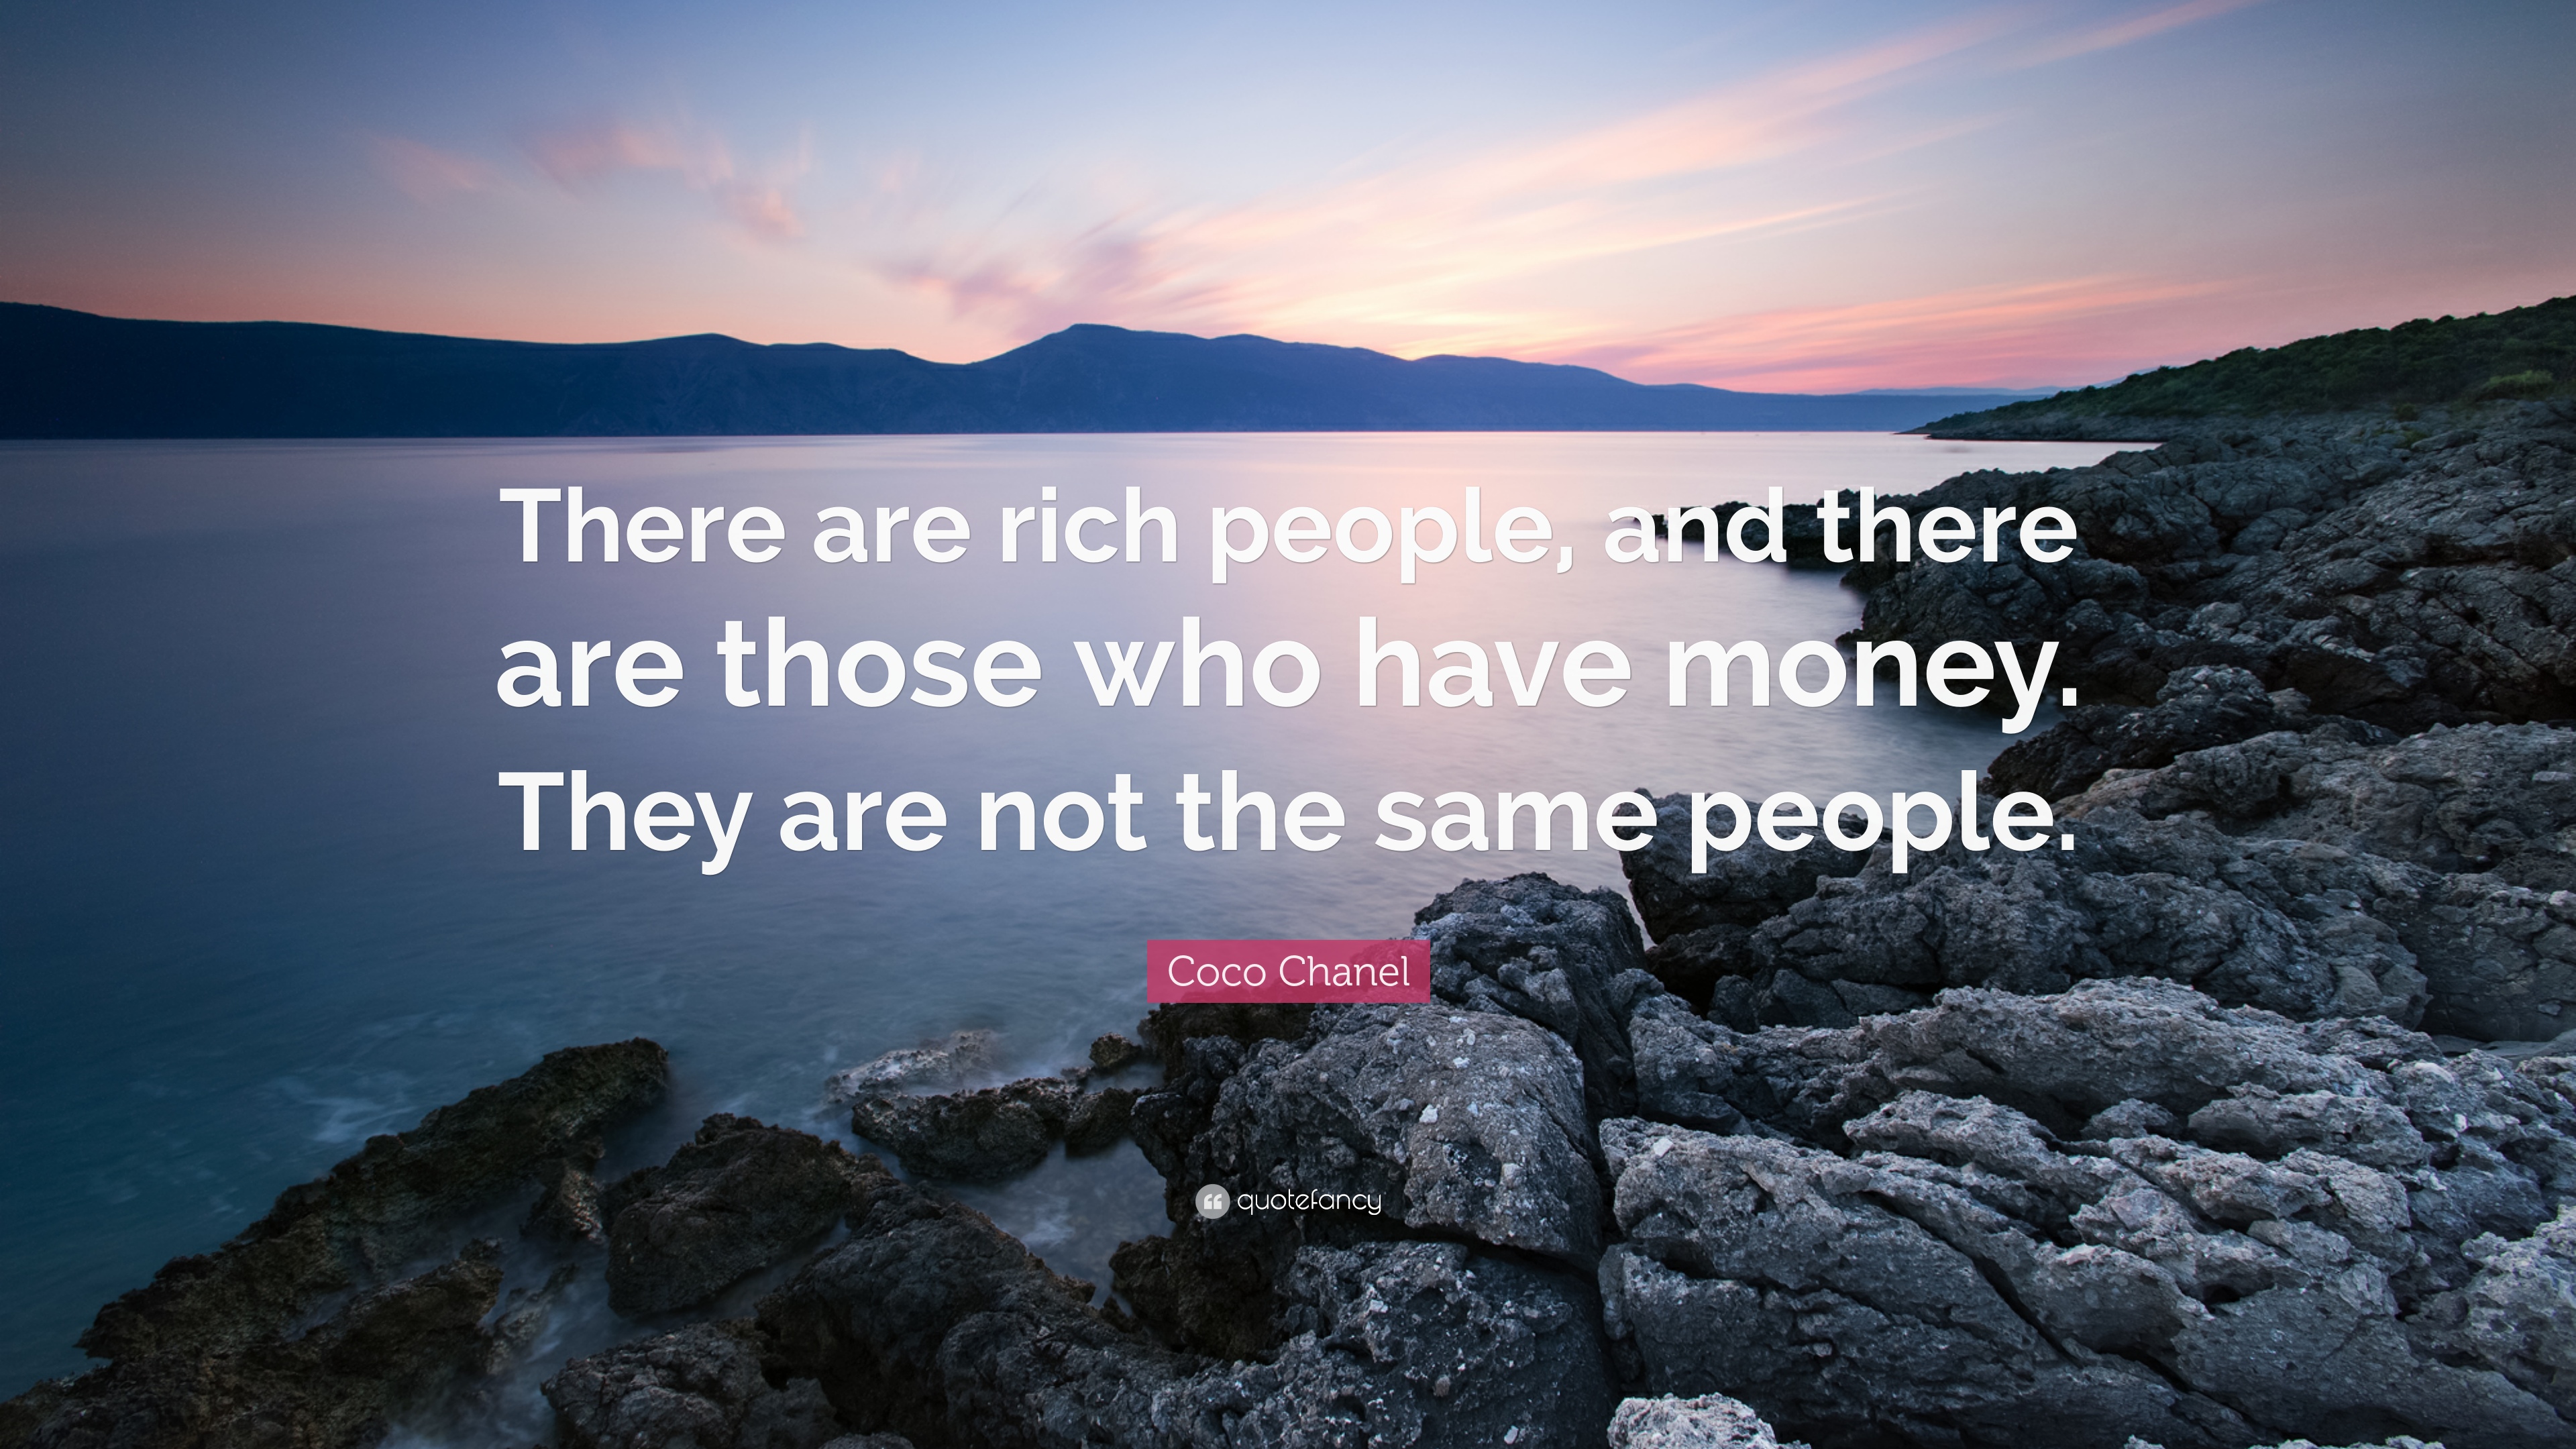 7 Inspirational Quotes About Money